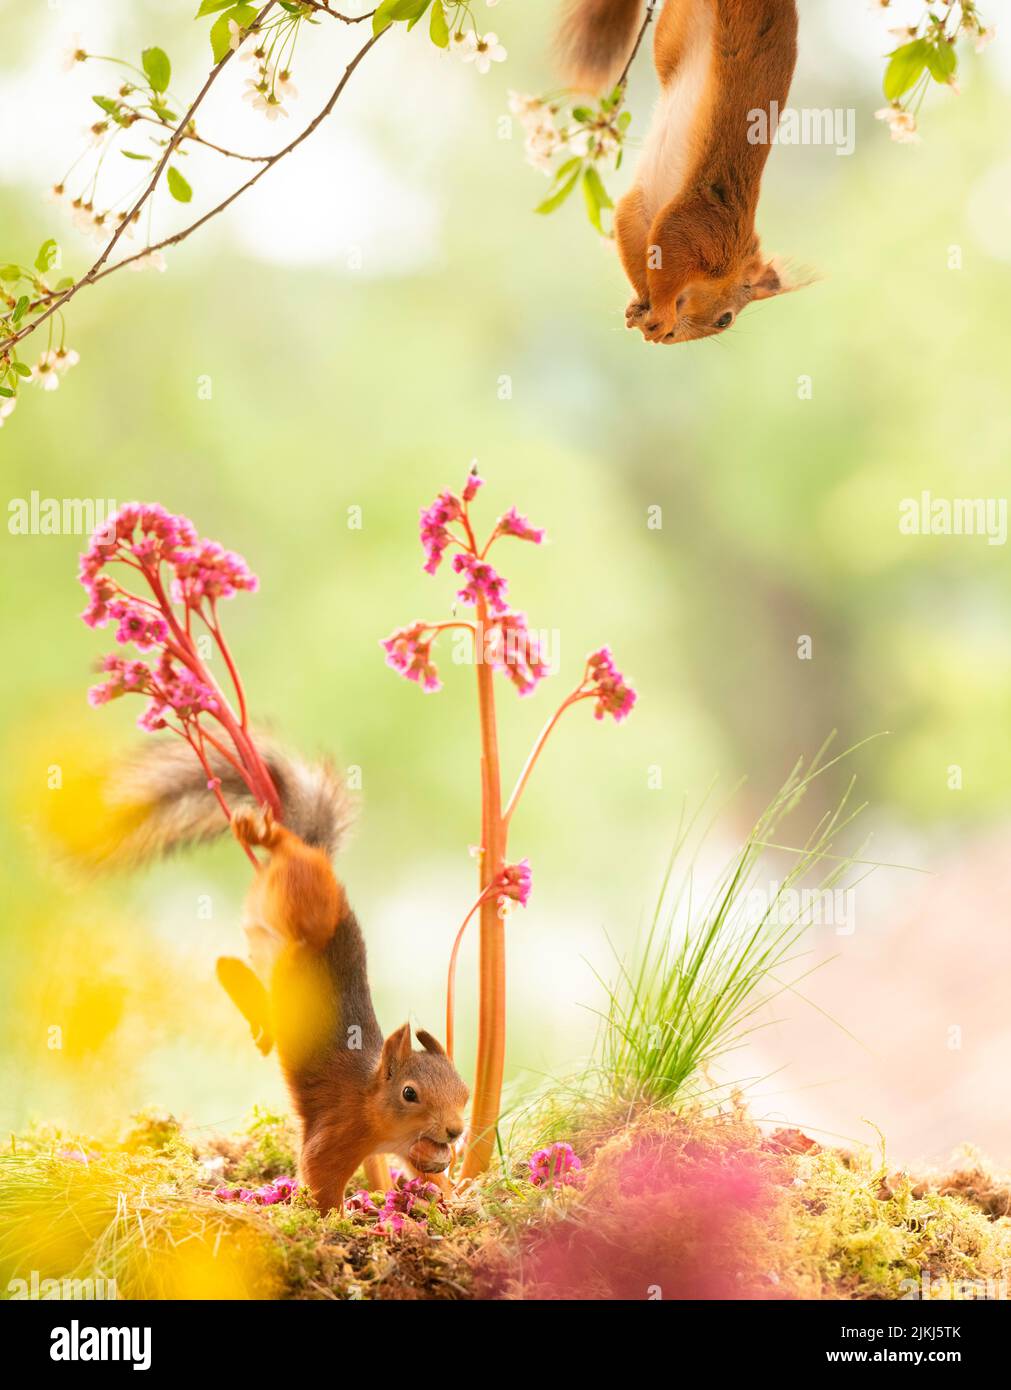 Red Squirrel is standing with Bergenia flowers, another looks from a flowering twig Stock Photo